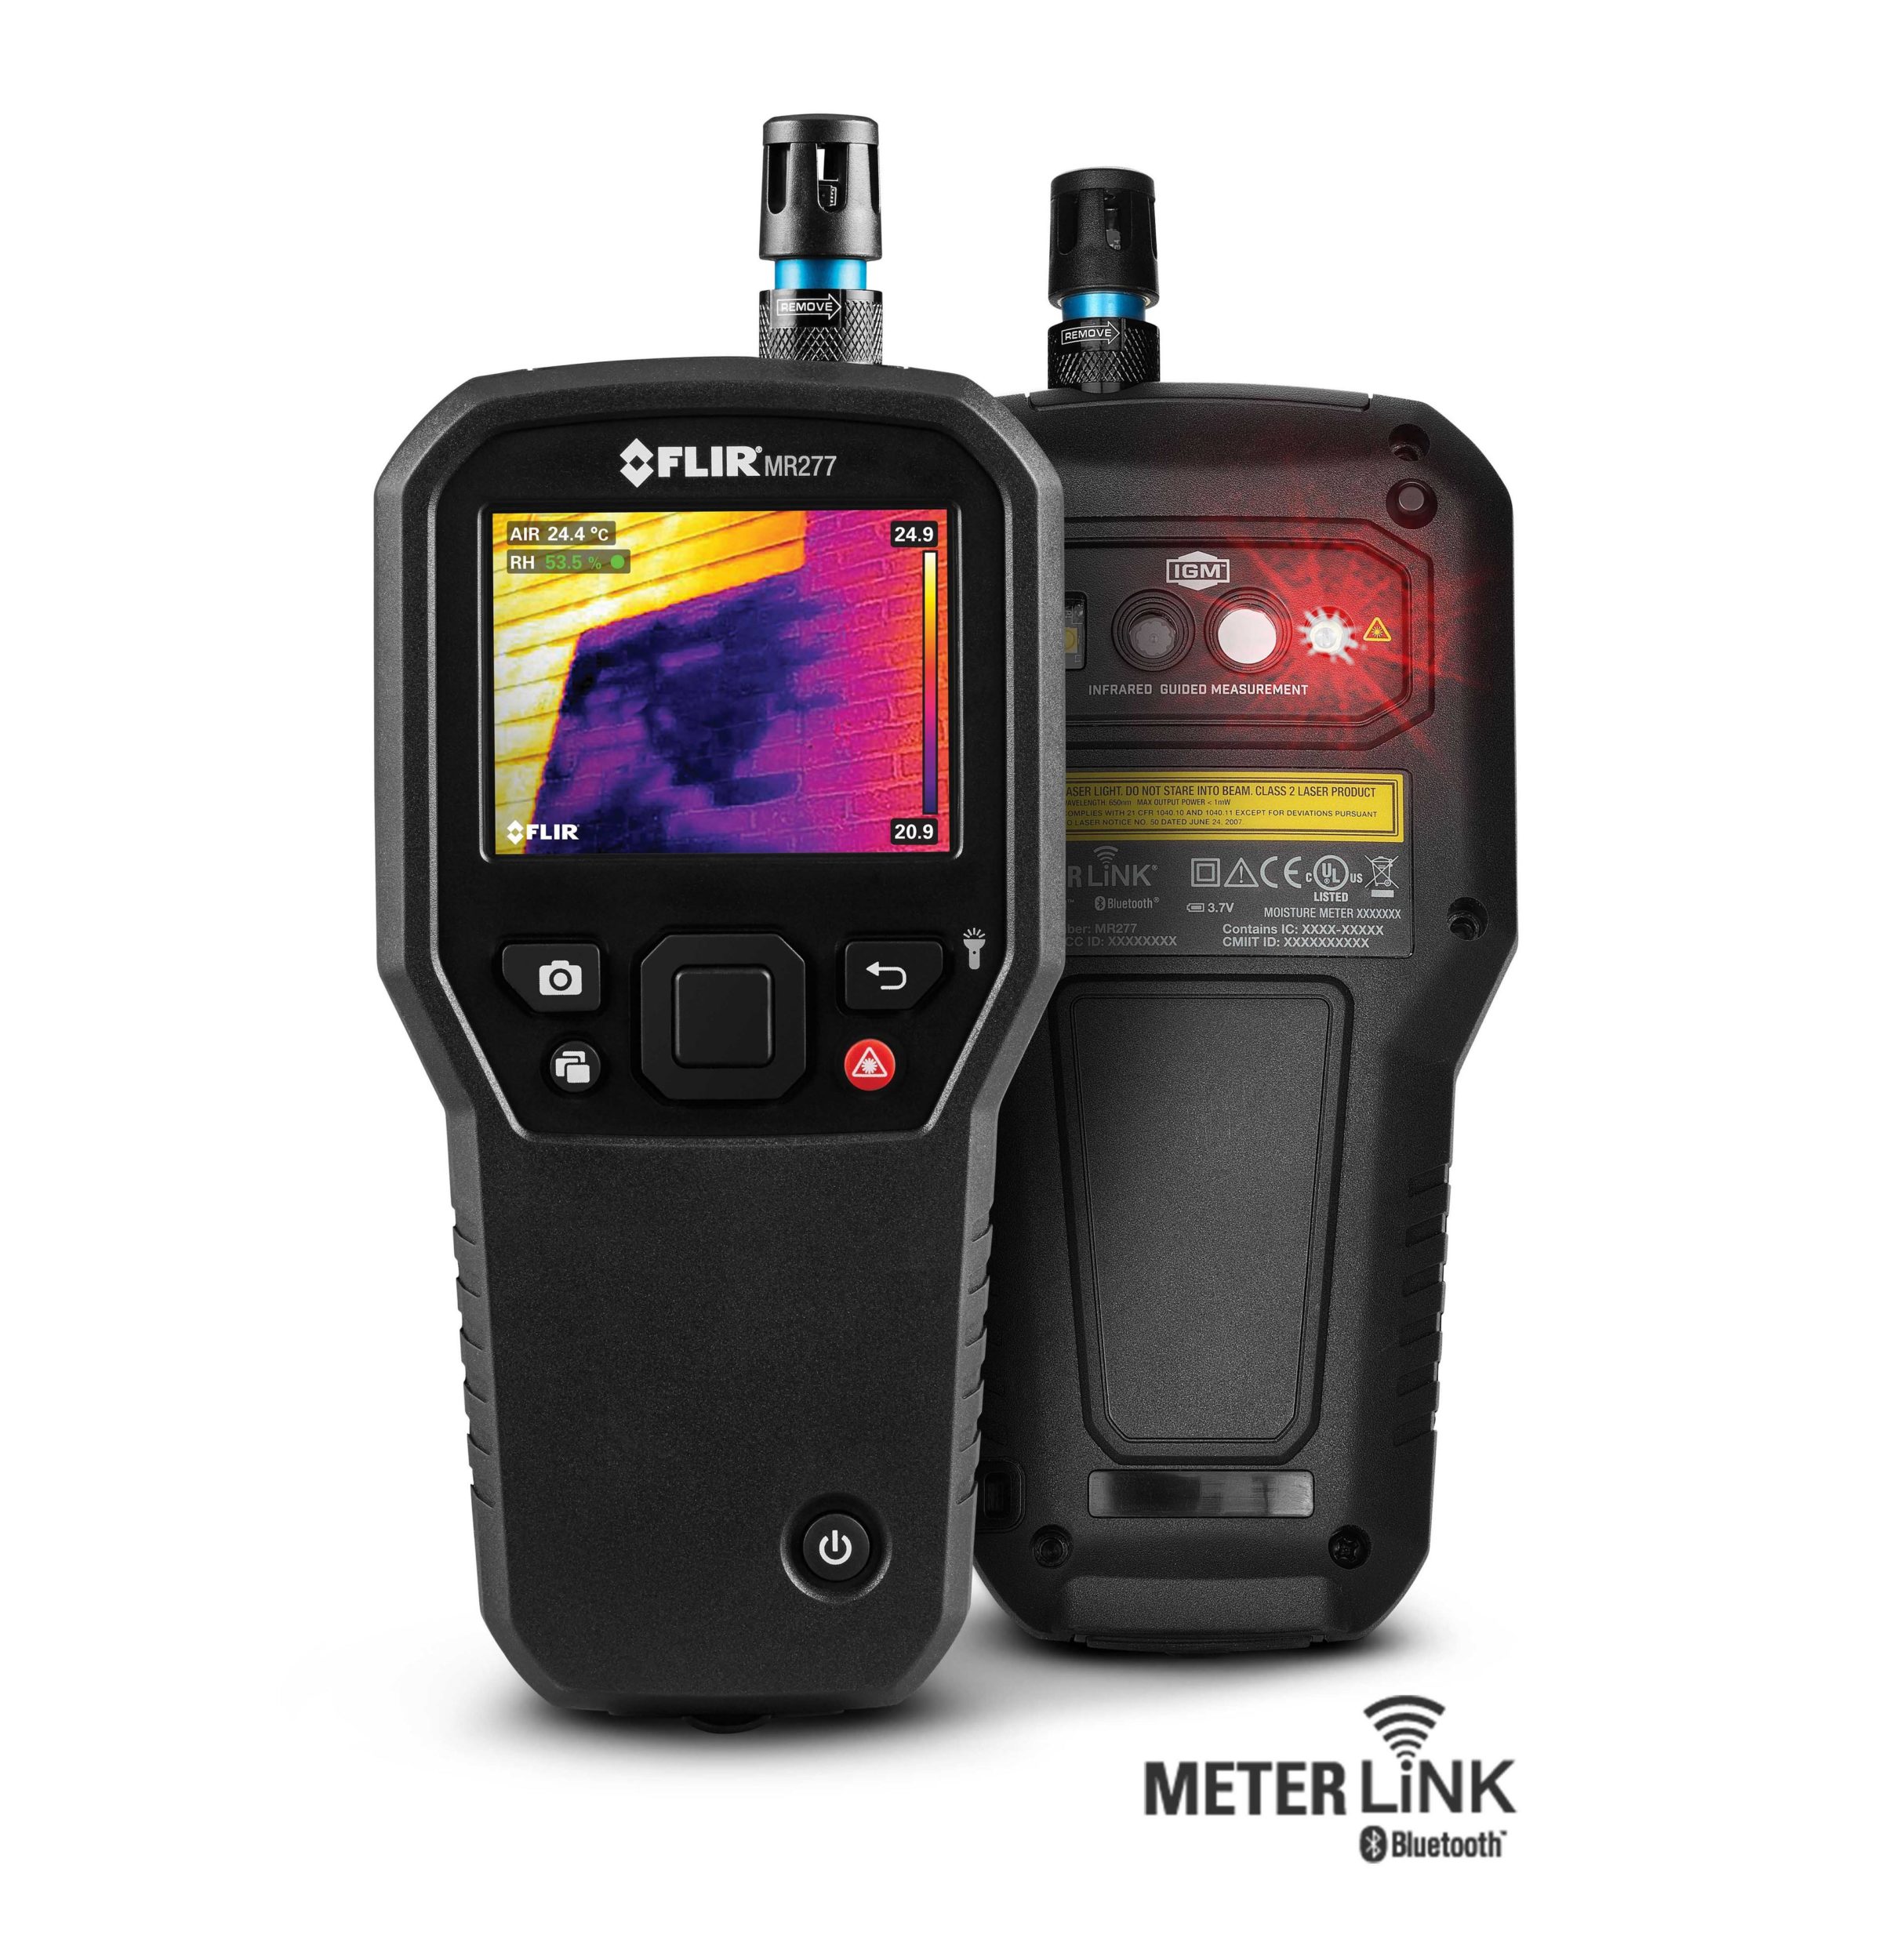 FLIR Launches First Thermal Imaging Building Inspection System: FLIR MR277